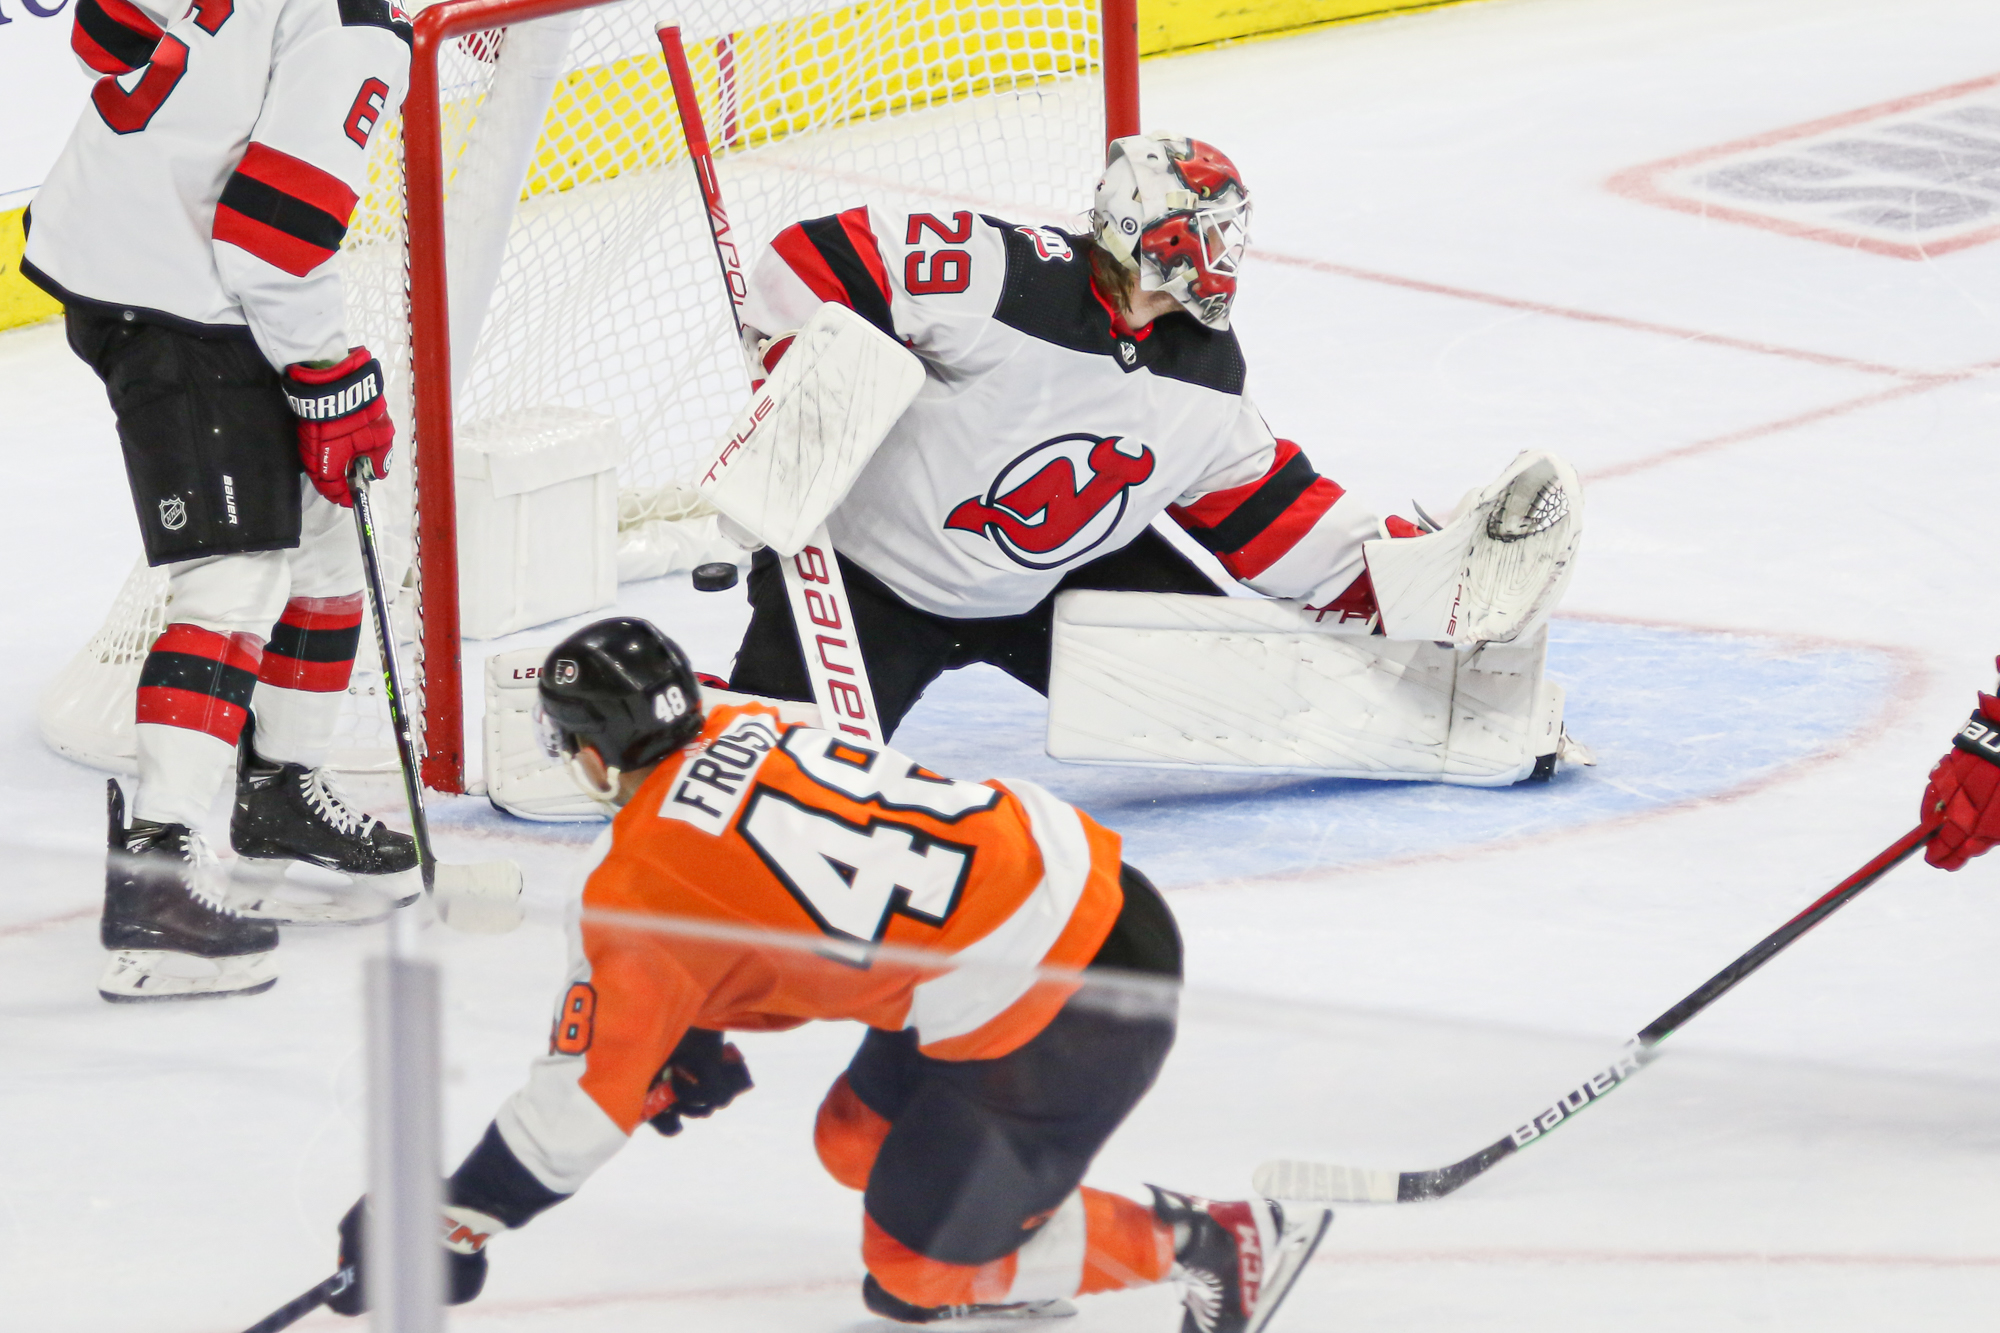 Flyers lose 10th straight as Blackwood, Devils get shutout – Delco